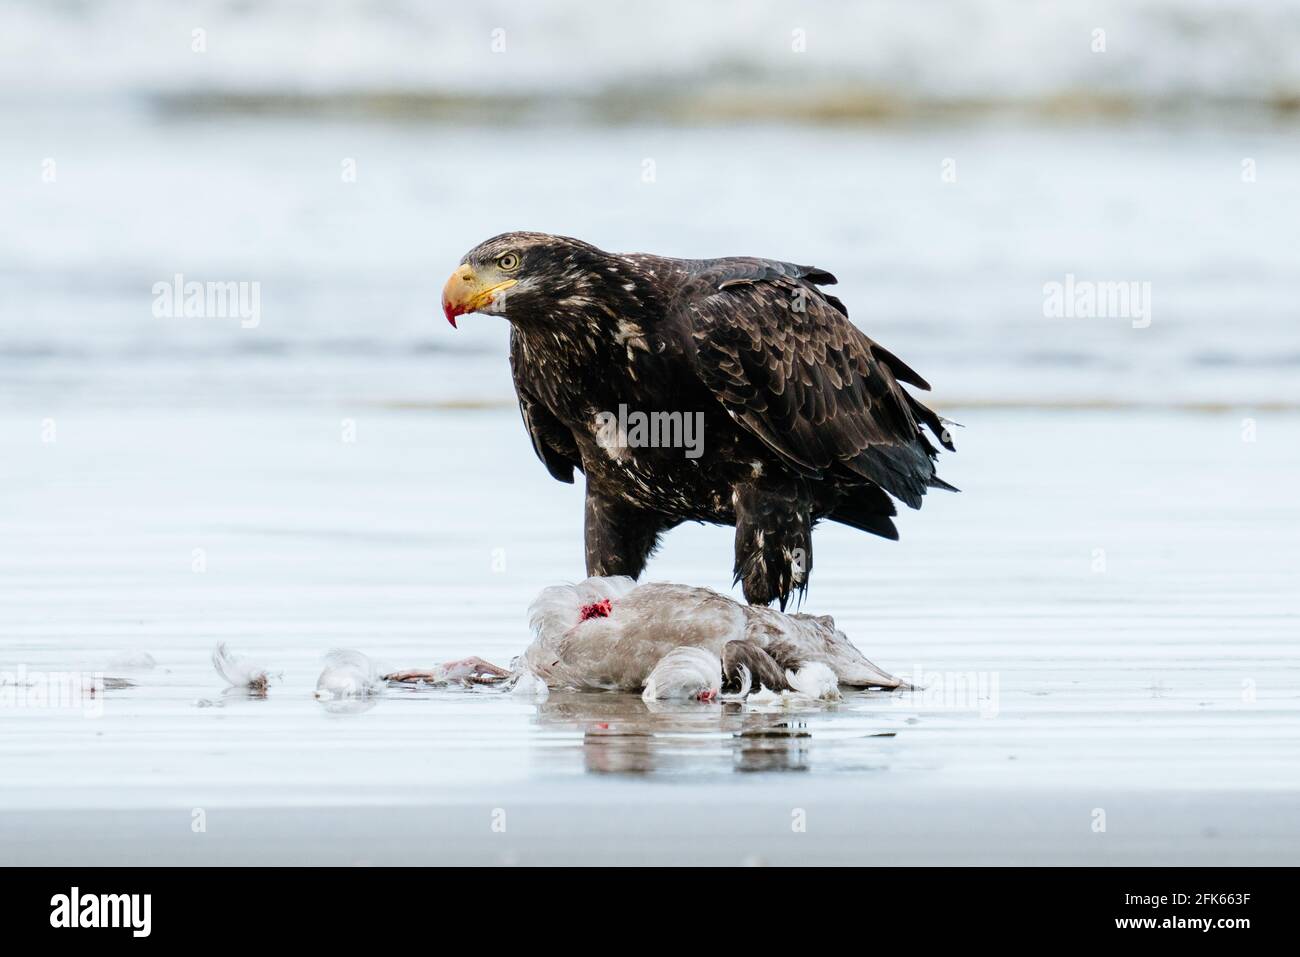 Closeup view of a bald eagle with a sea gull on the beach Stock Photo